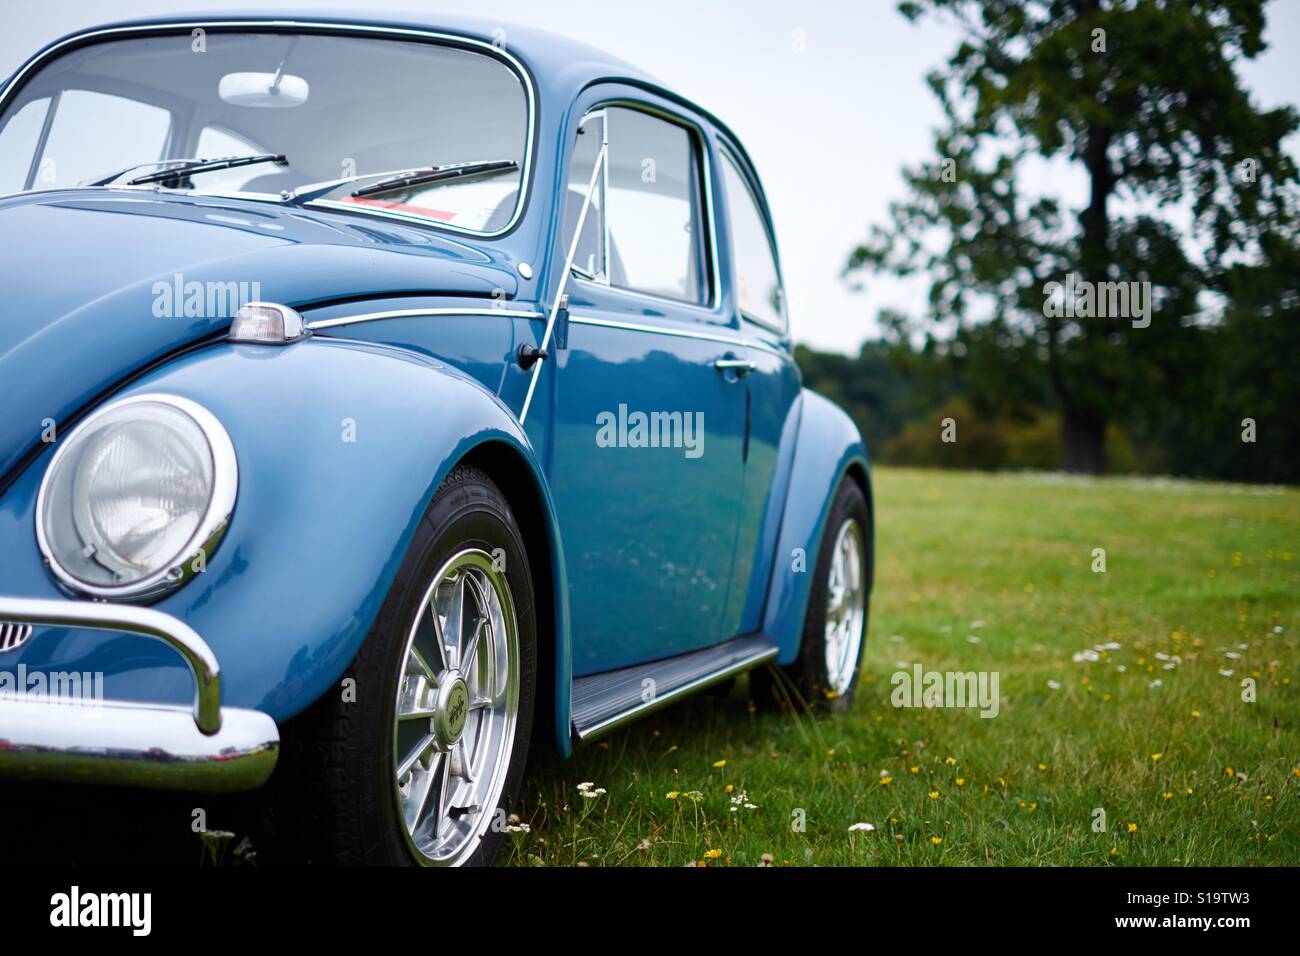 A classic blue Volkswagen Beetle in a green field Stock Photo